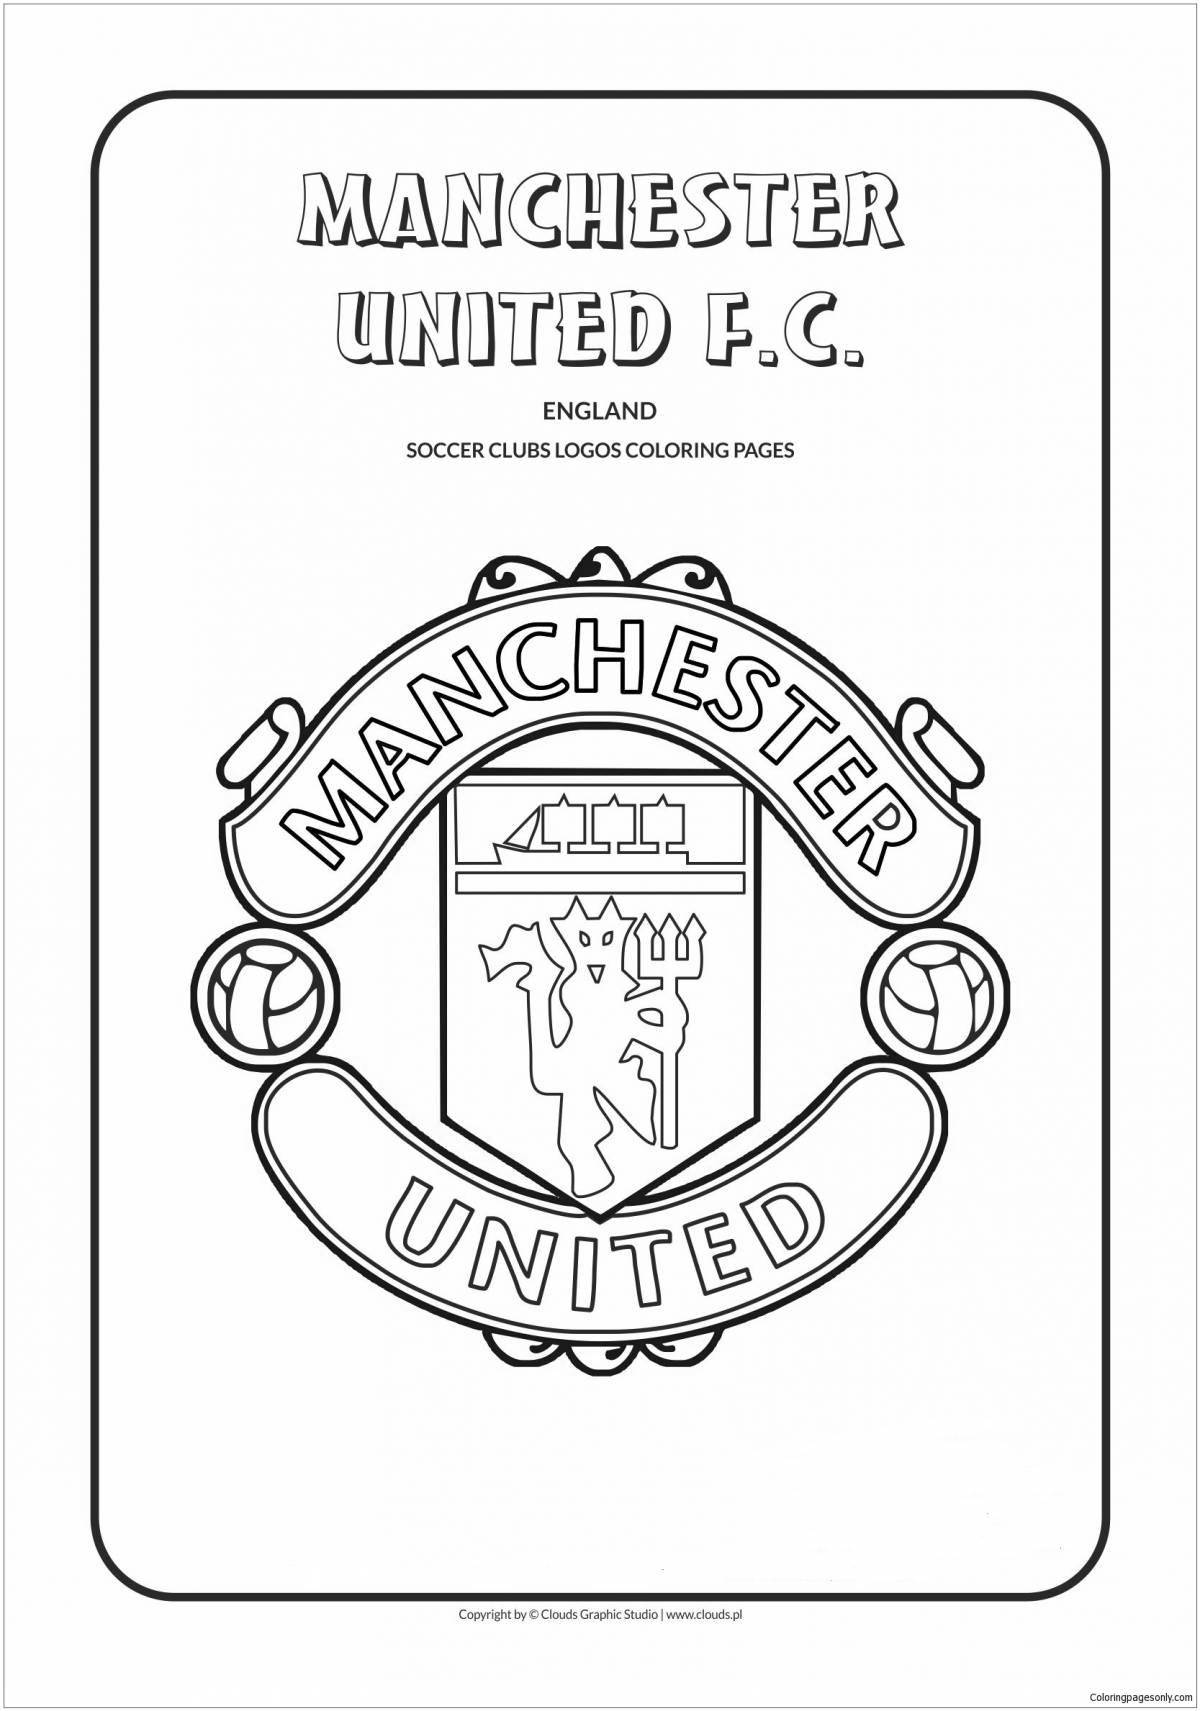 Great liverpool coloring book